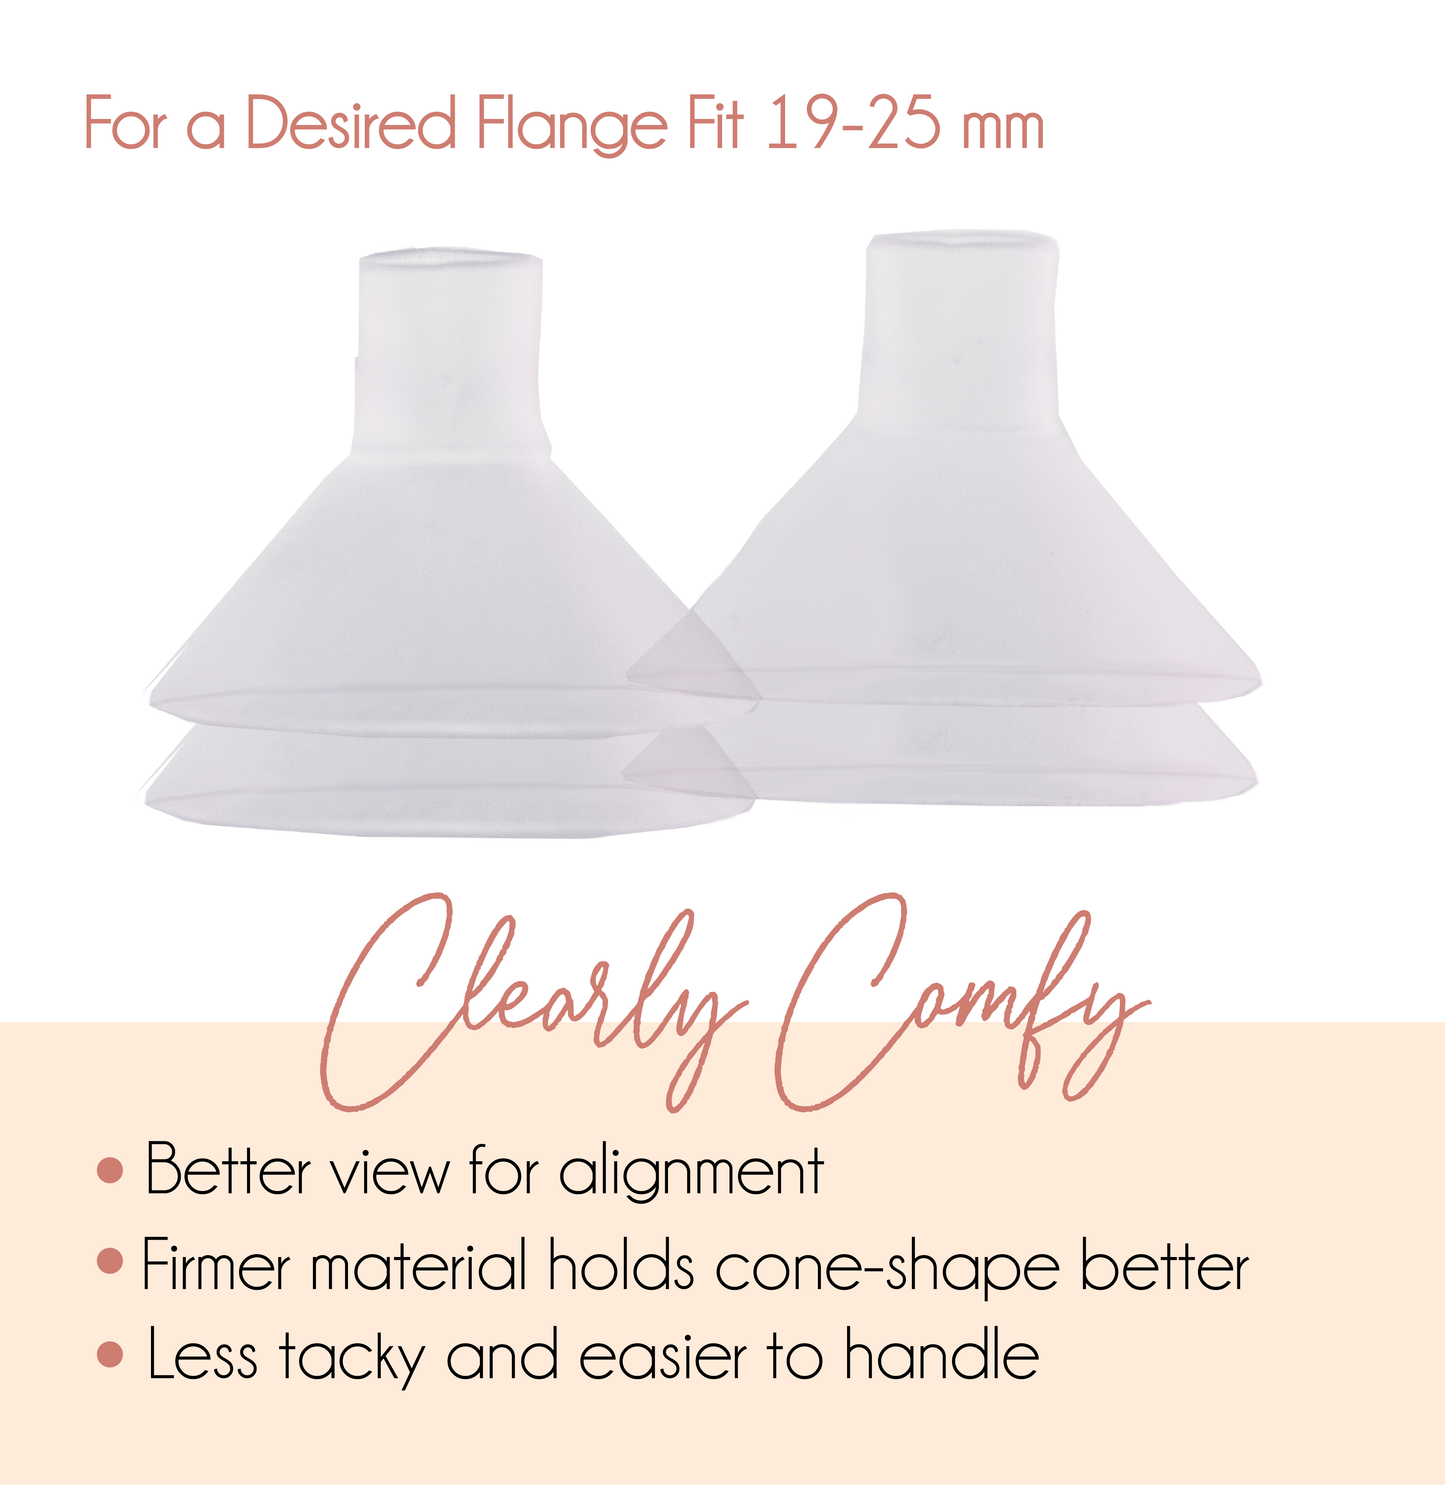 Take the pain out of pumping and get a better flange fit with the Clearly Comfy Cushions from BeauGen. Get all of the alignment, pain relief, and improved fit while saving money by purchasing two pair of Breast Pump Cushions.